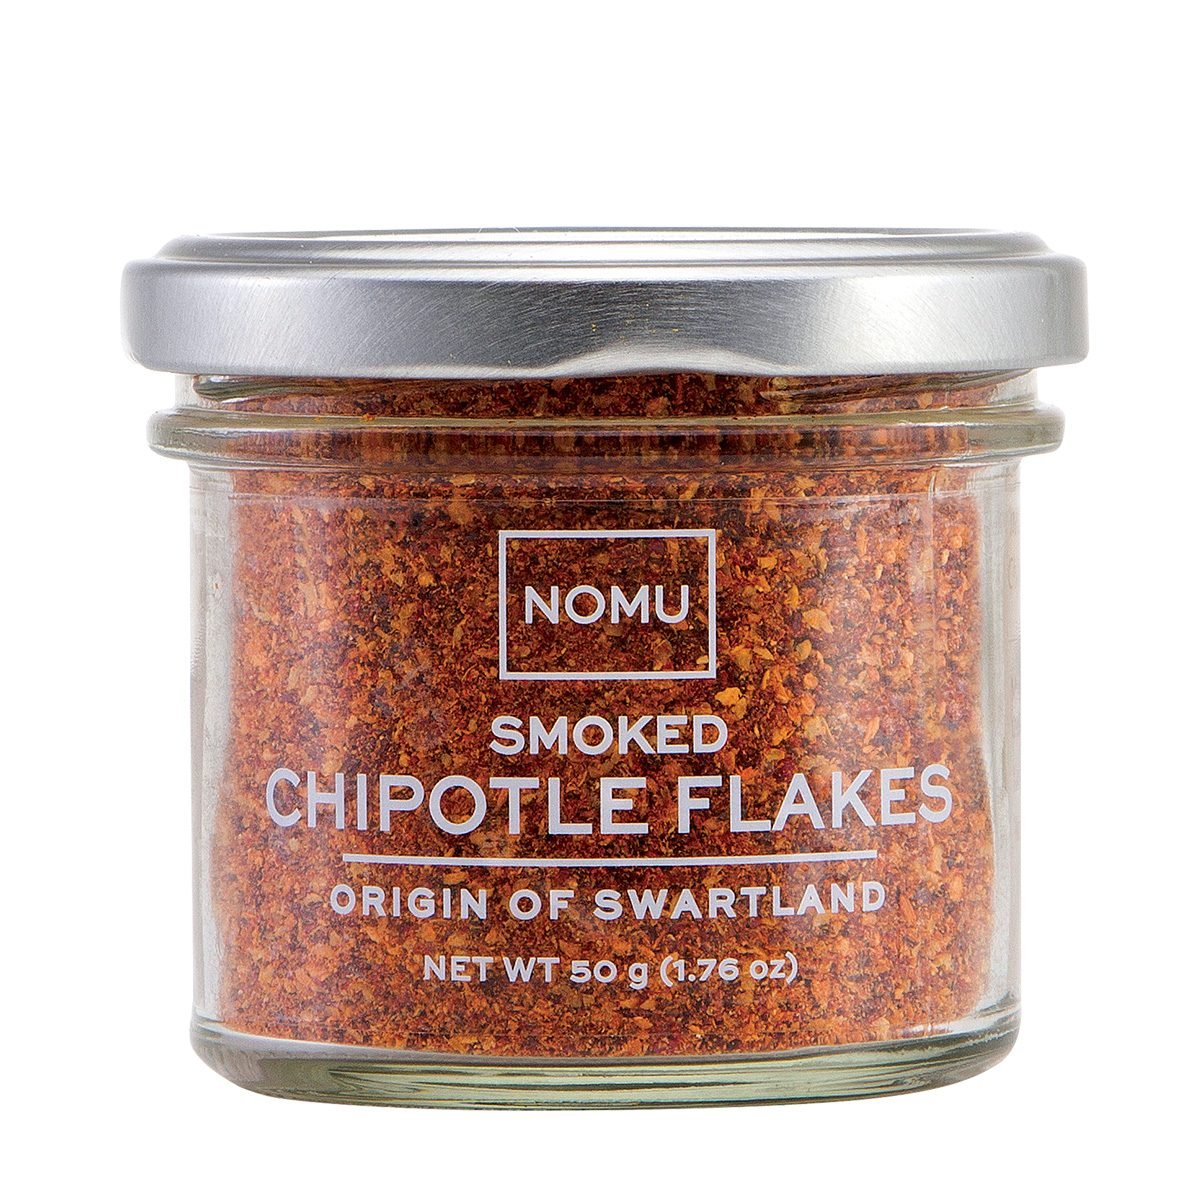 Nomu Cook's Collection Smoked Chipotle Flakes 50g - Prime Gourmet Online